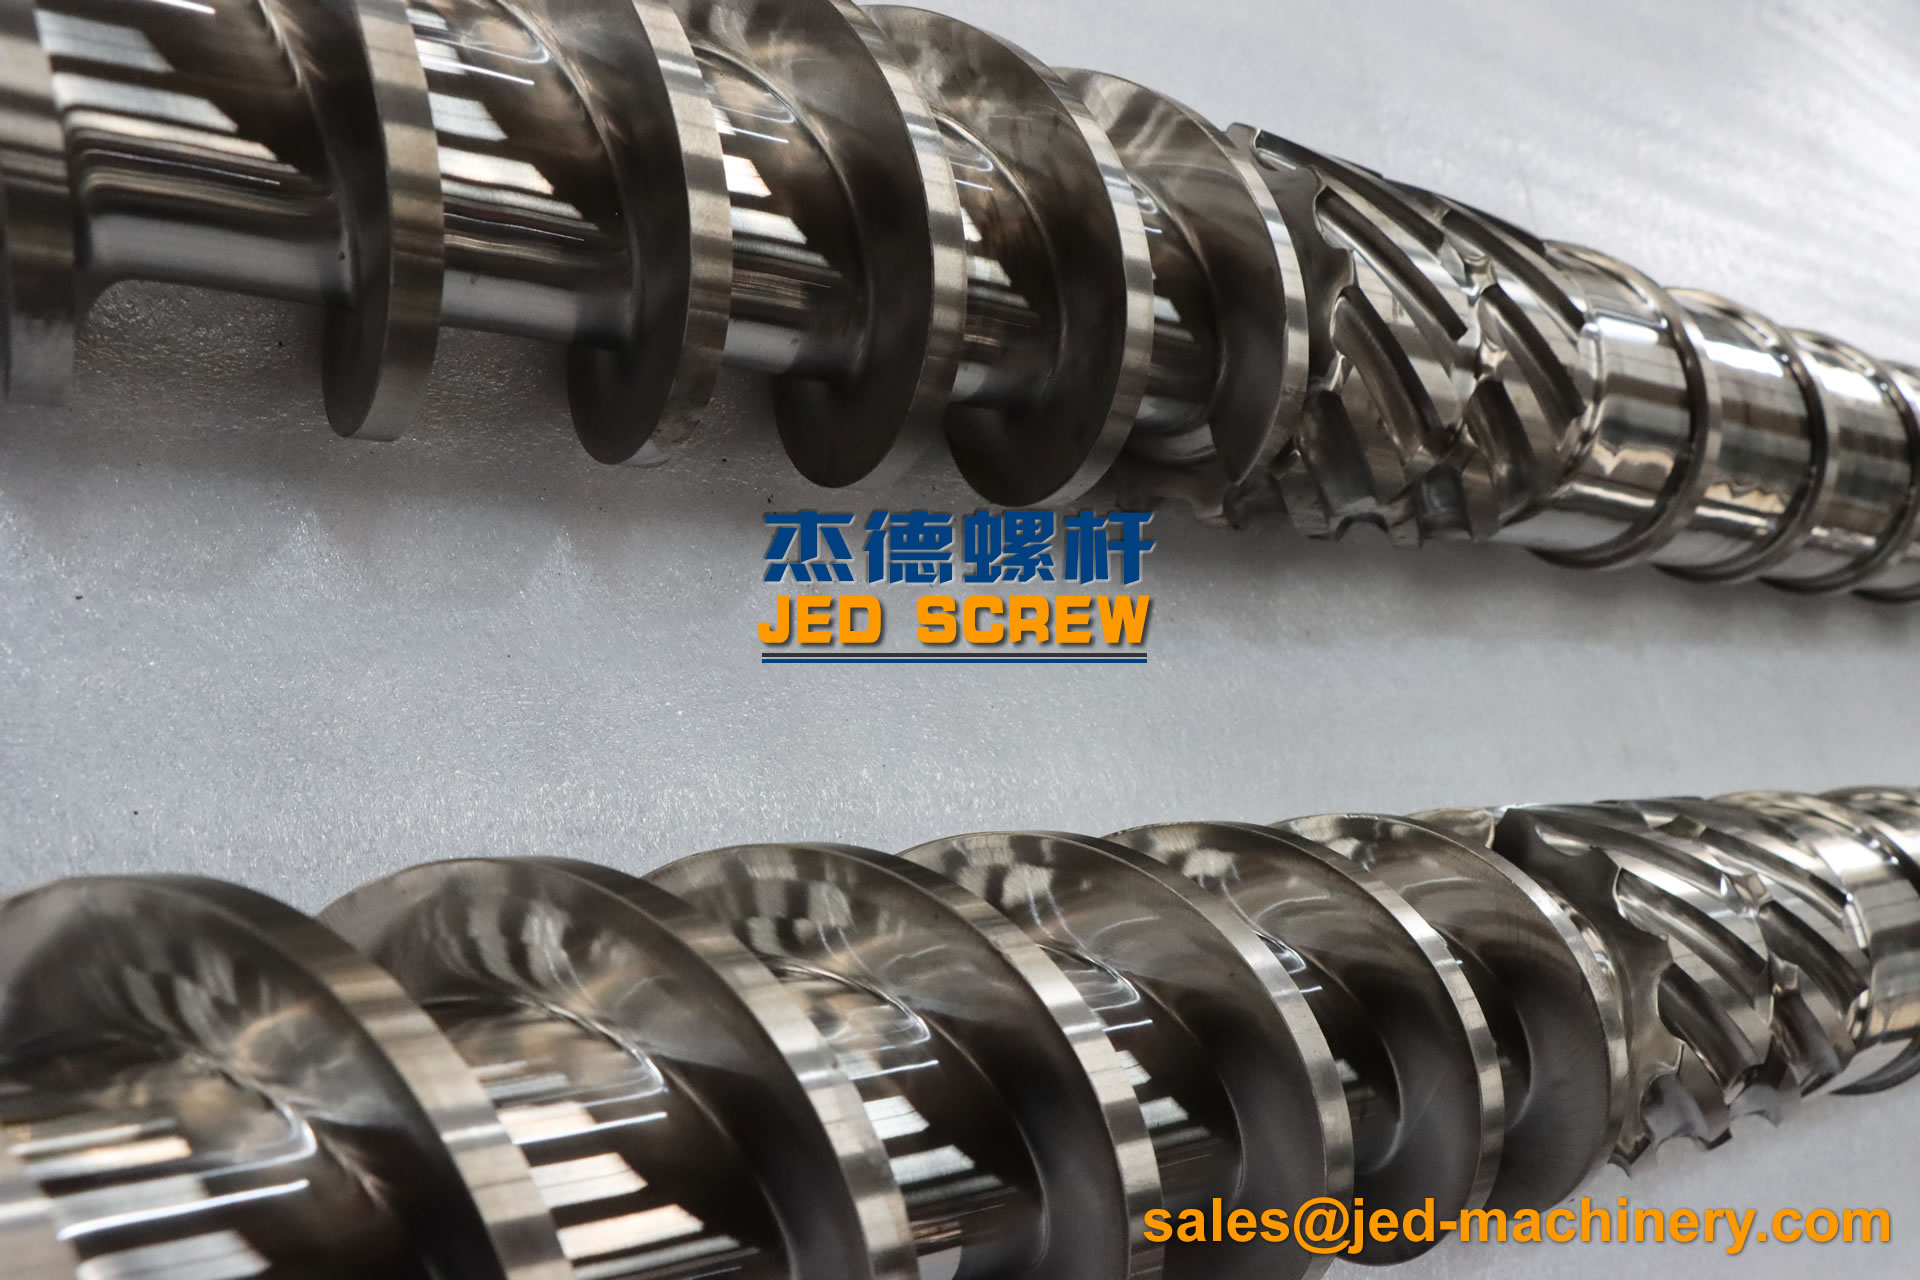 What are the differences between screw and lead screw - Industry News - 1